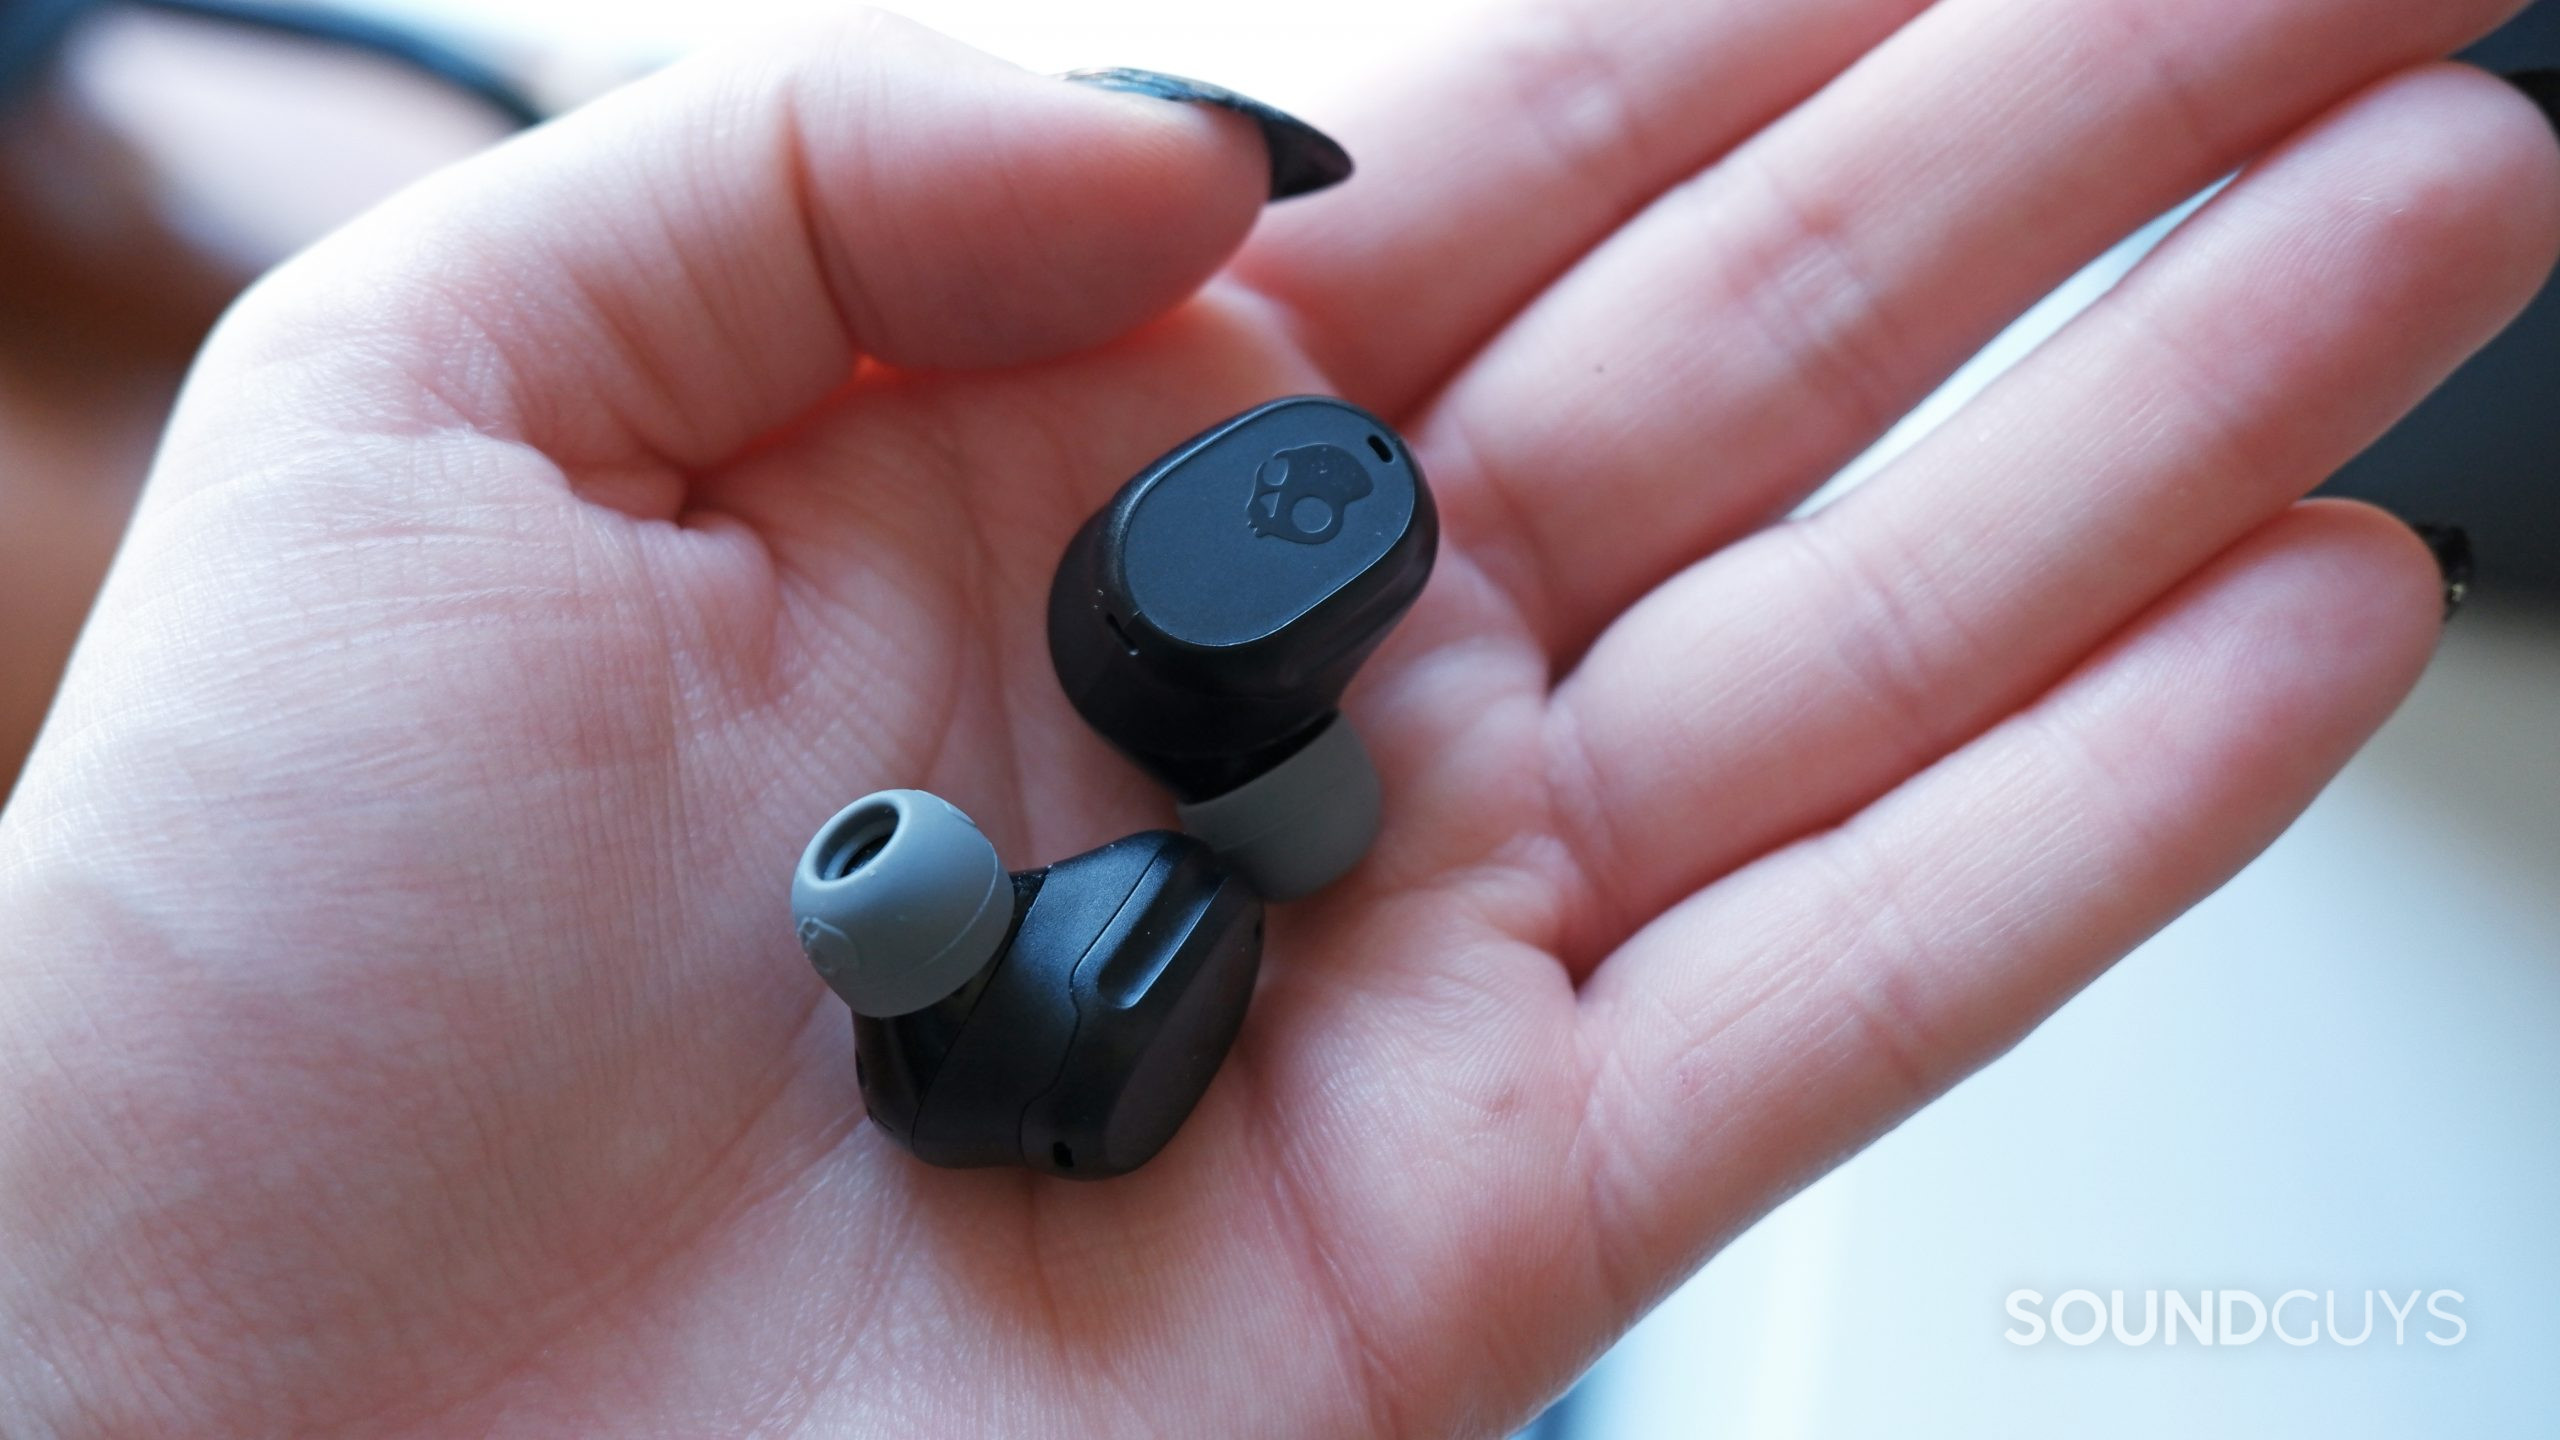 The Skullcandy Mod XT earbuds in a hand.